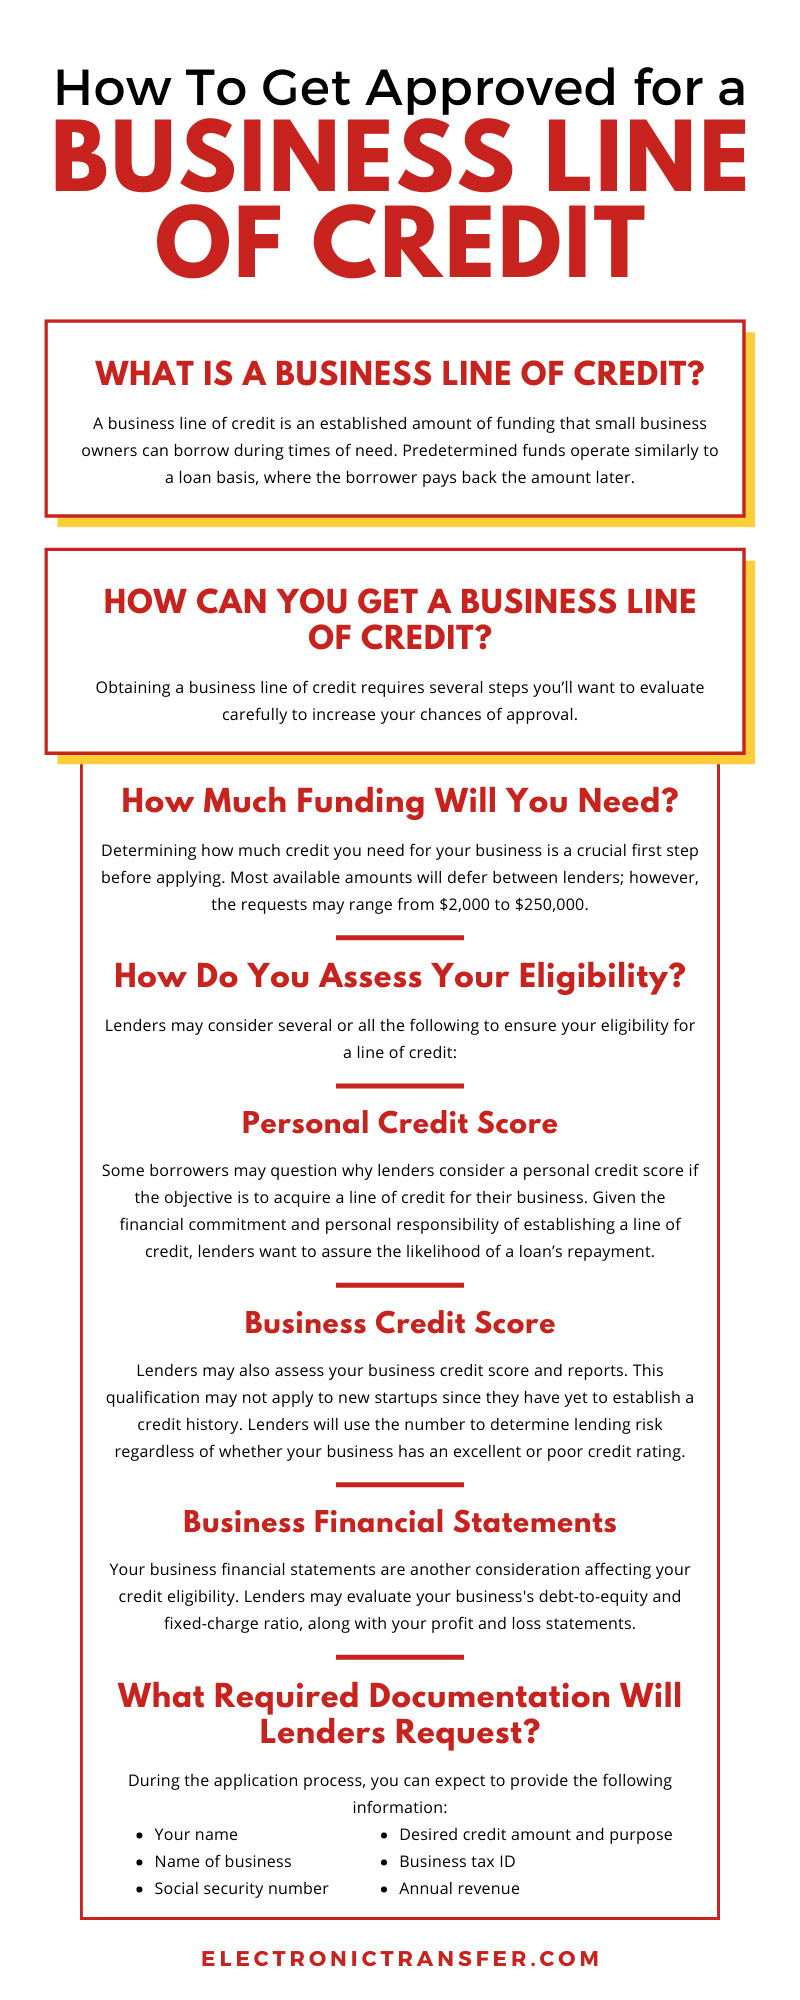 How To Get Approved for a Business Line of Credit
